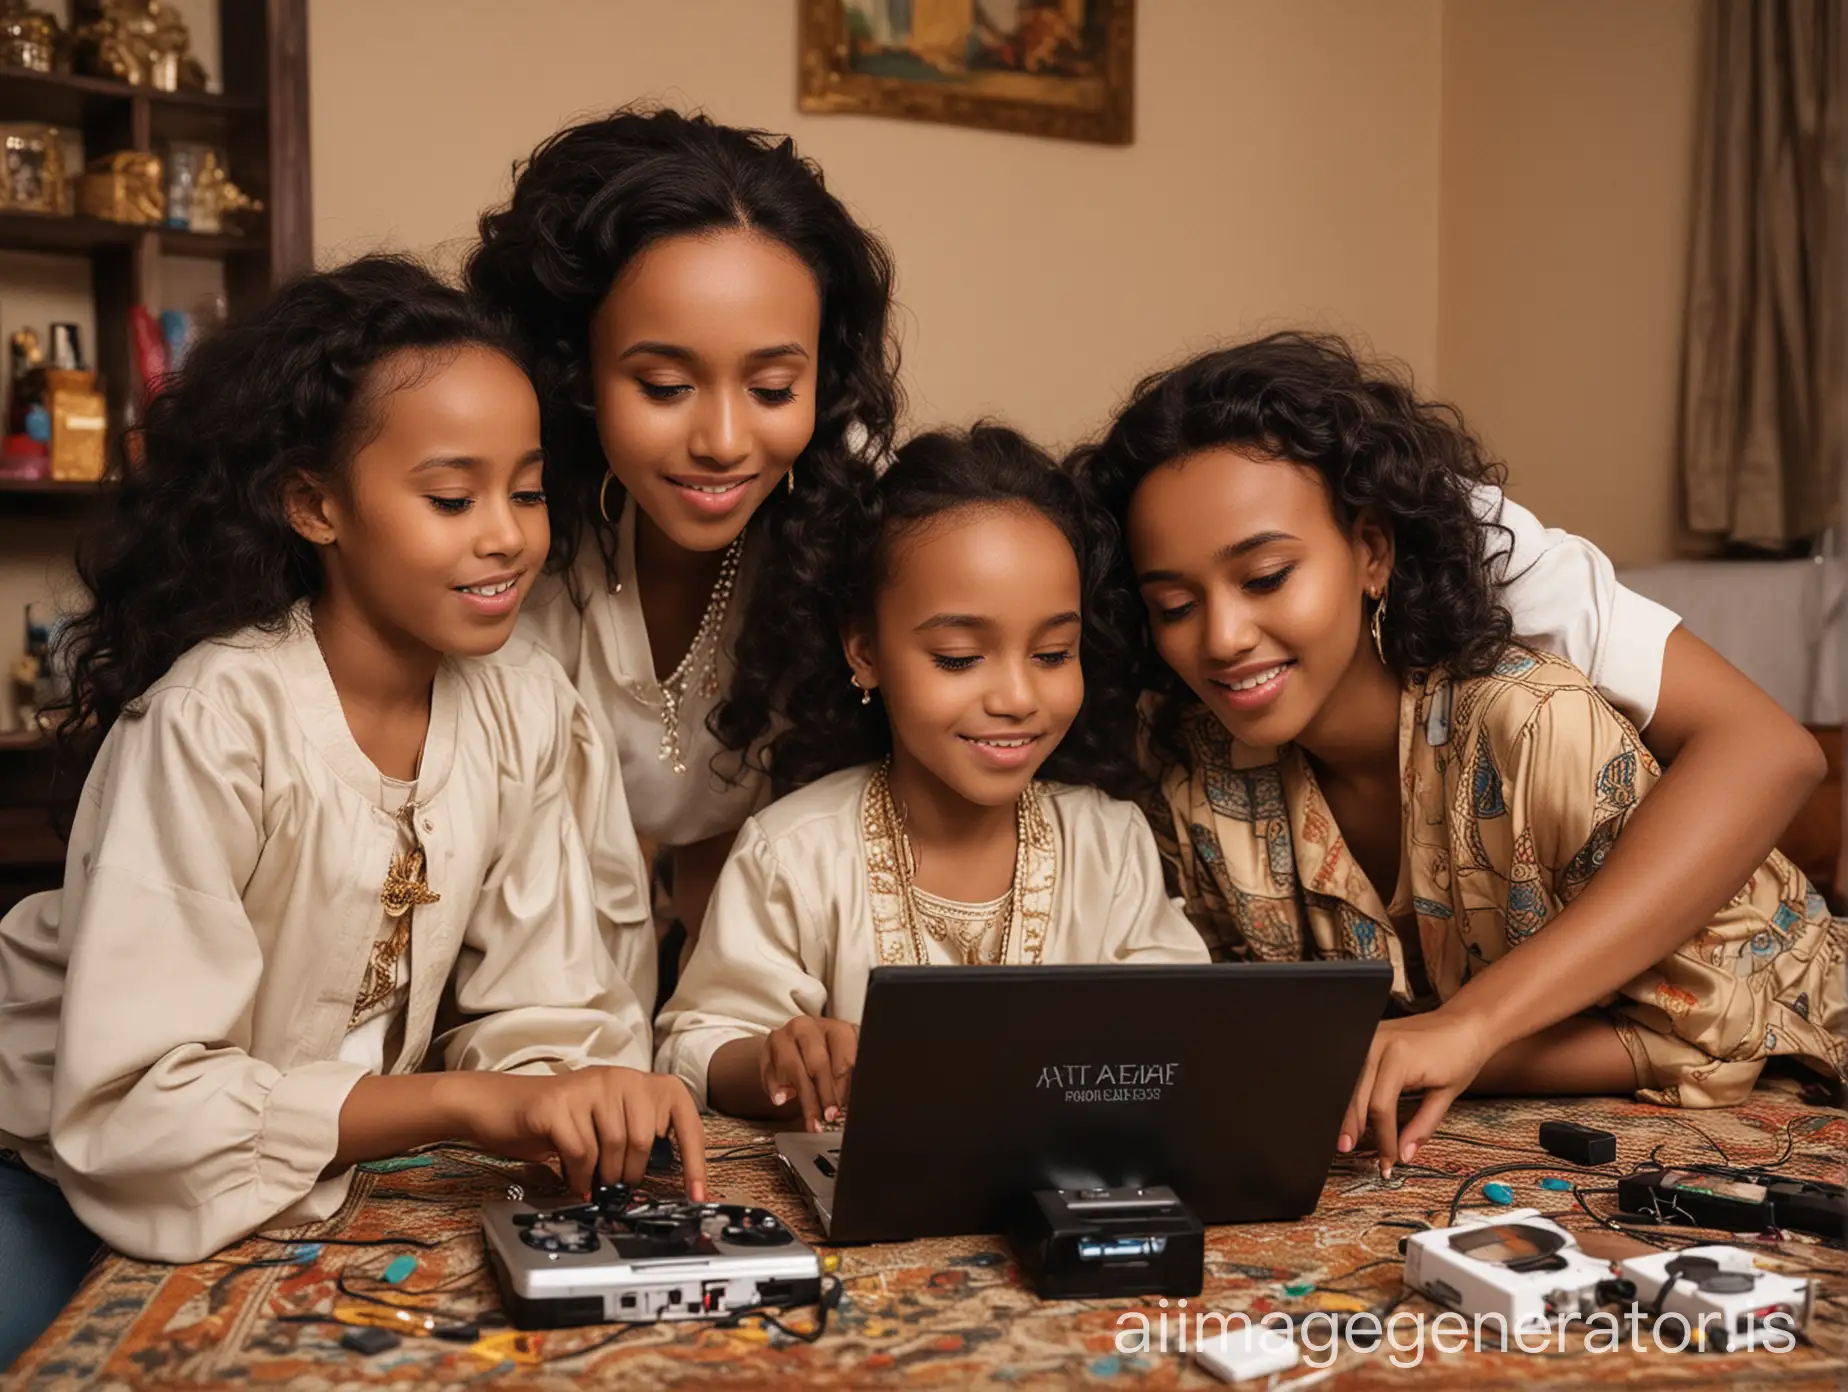 Ethiopian-Family-Orders-HighEnd-Items-Online-While-Children-Play-Video-Games